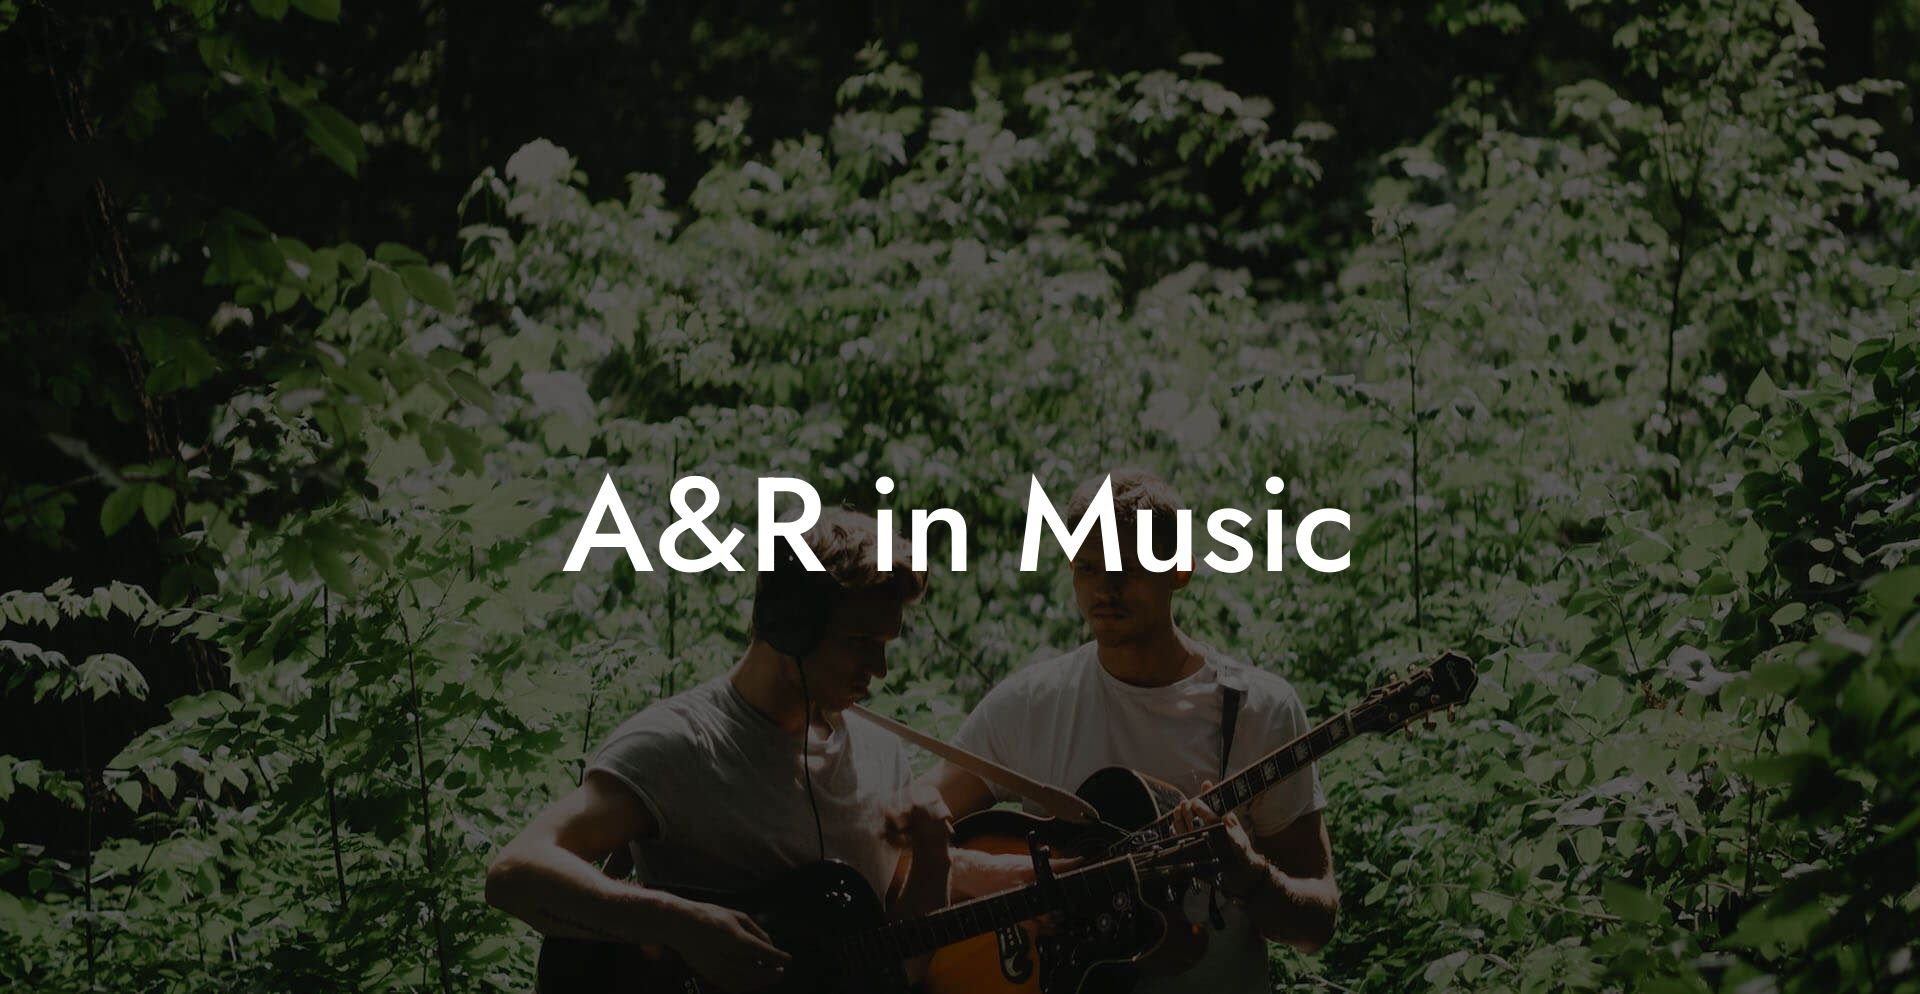 A&R in Music